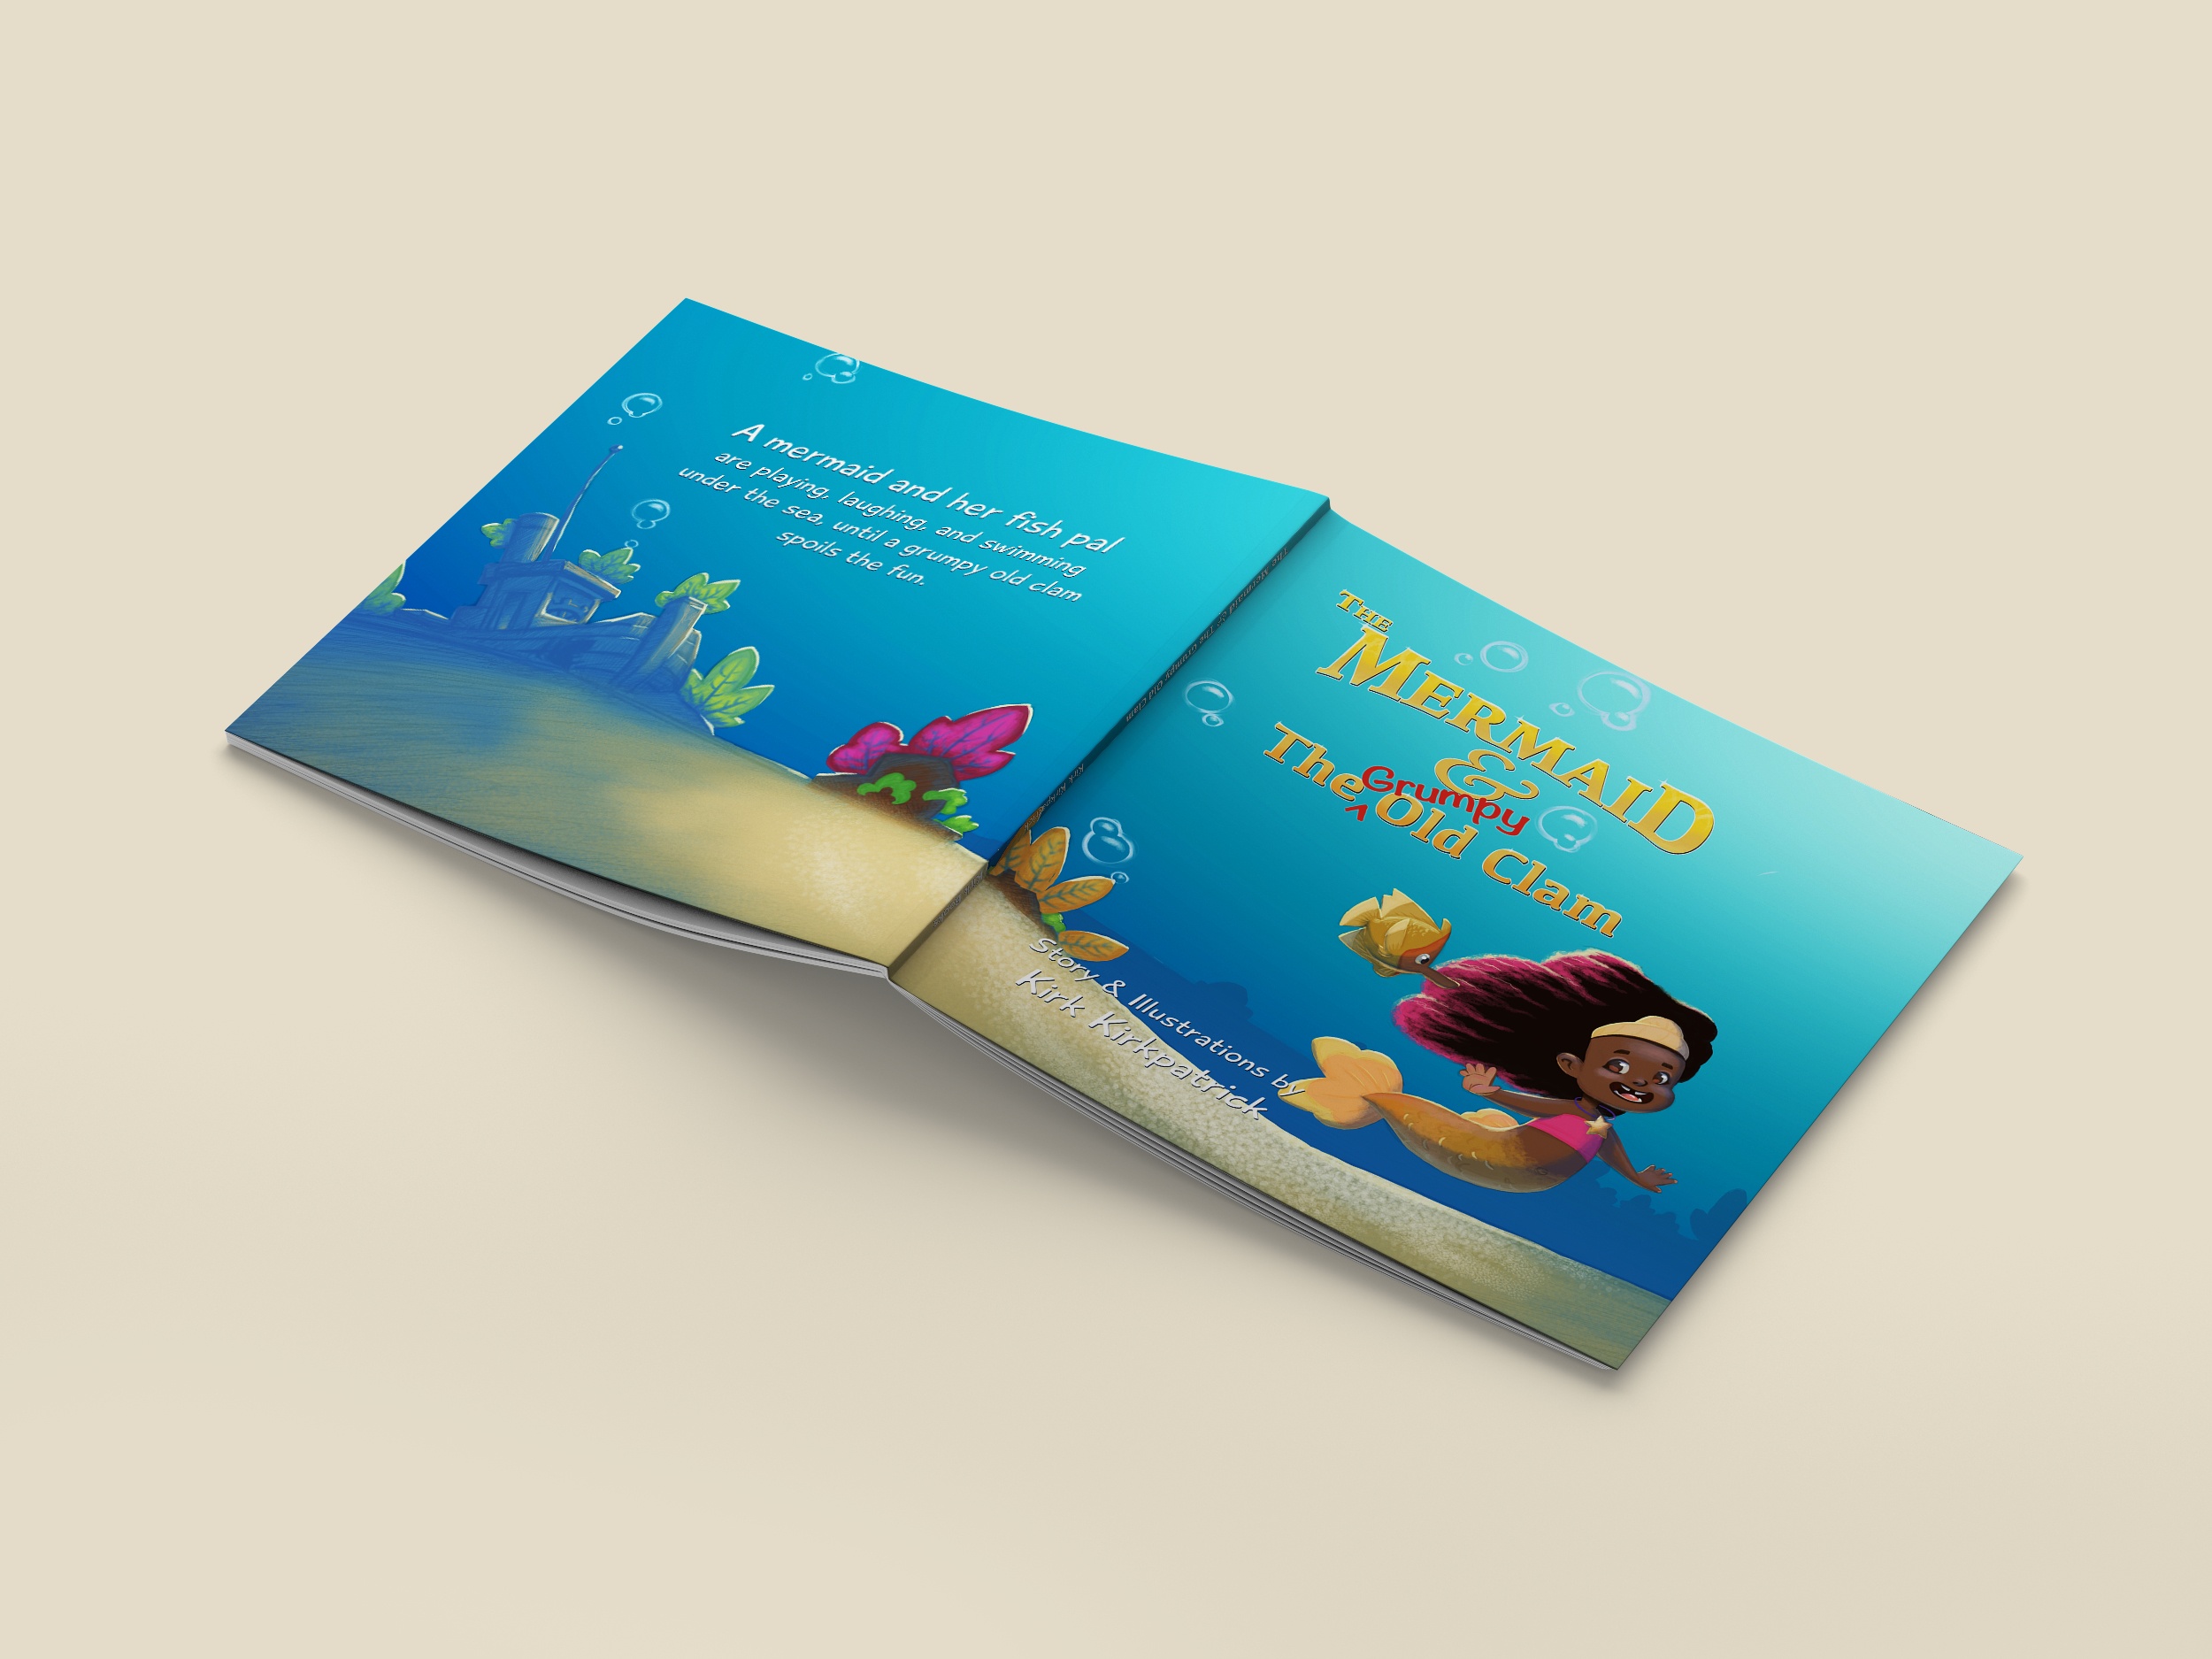 Professional Illustration for Children's Books, Games, and Education - Mermaid Book Mockup Design